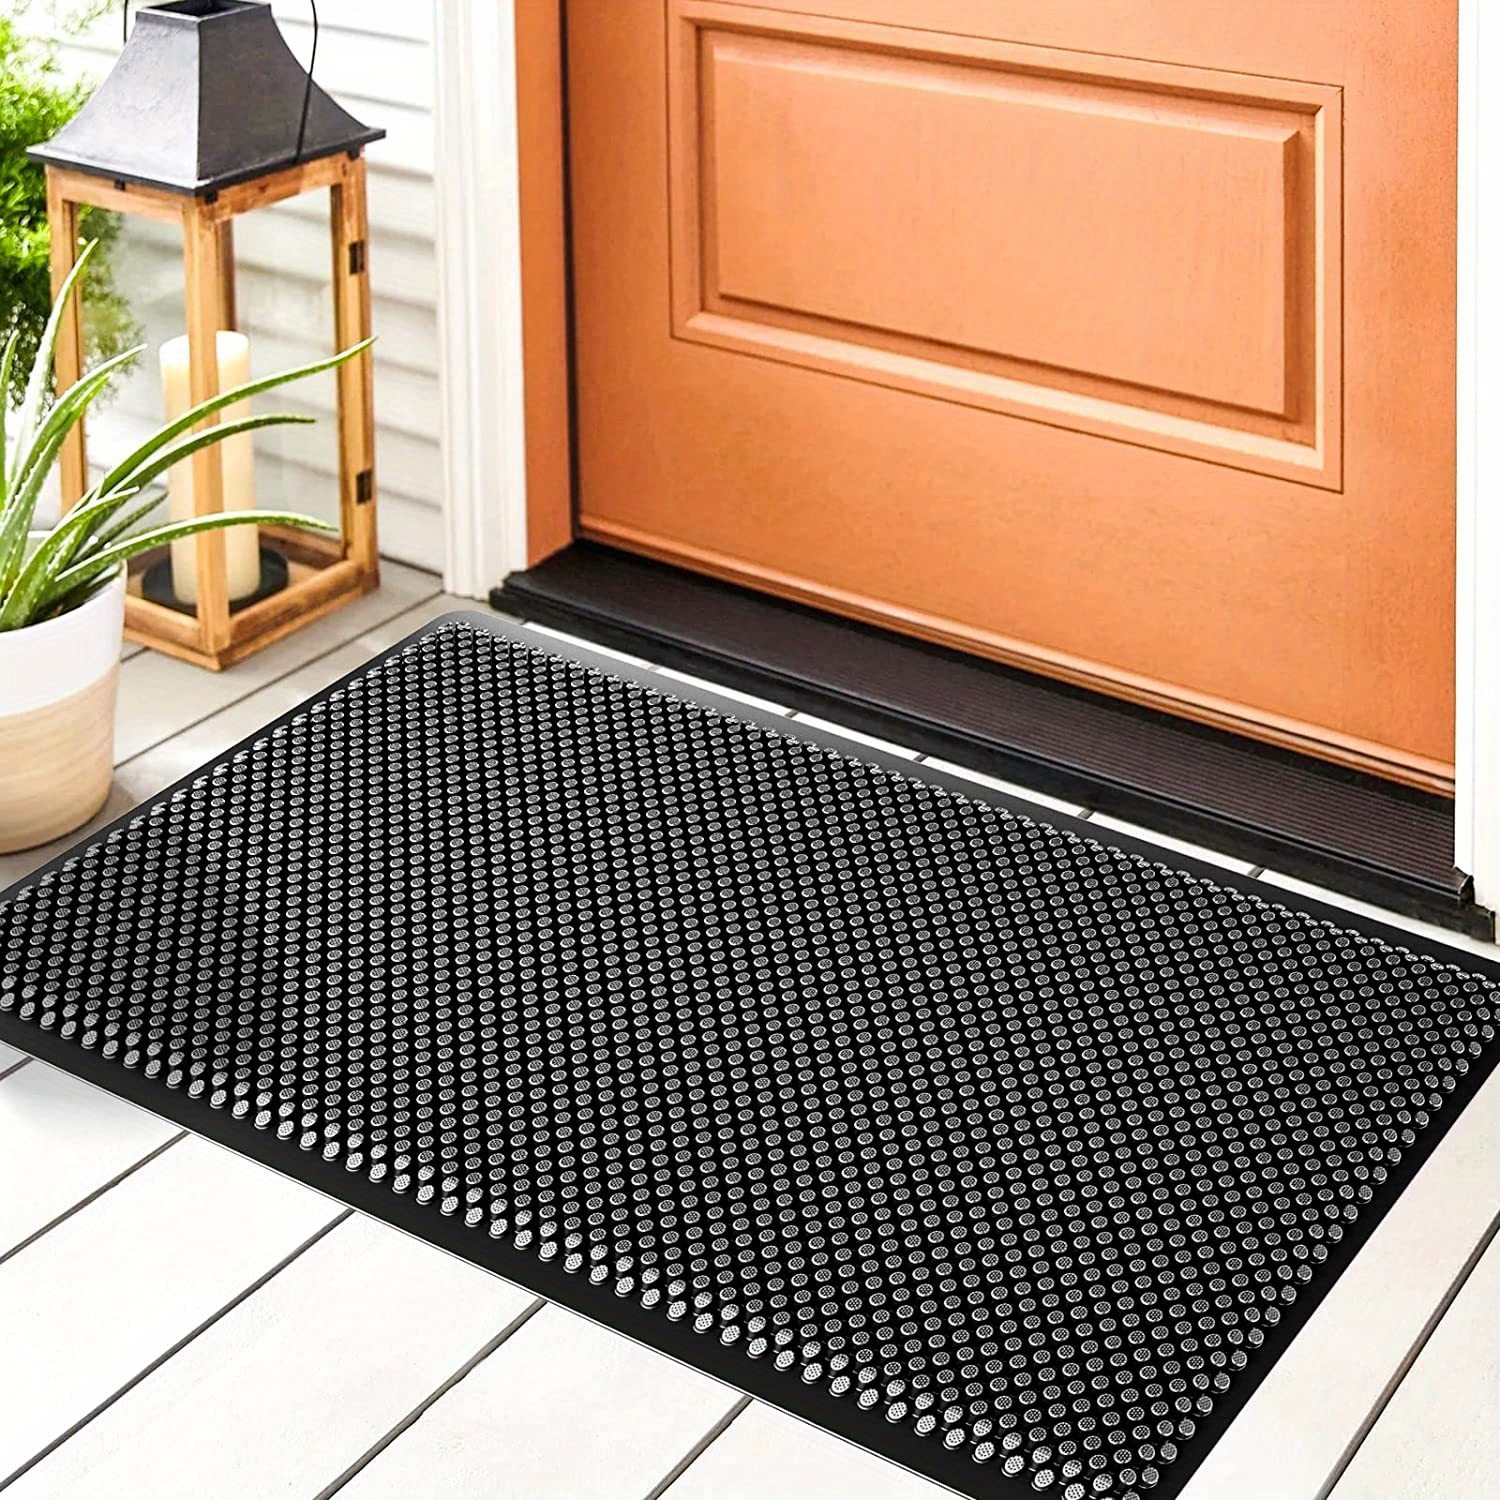 Silicone Floor Mat for Easy Cleanup or Playing